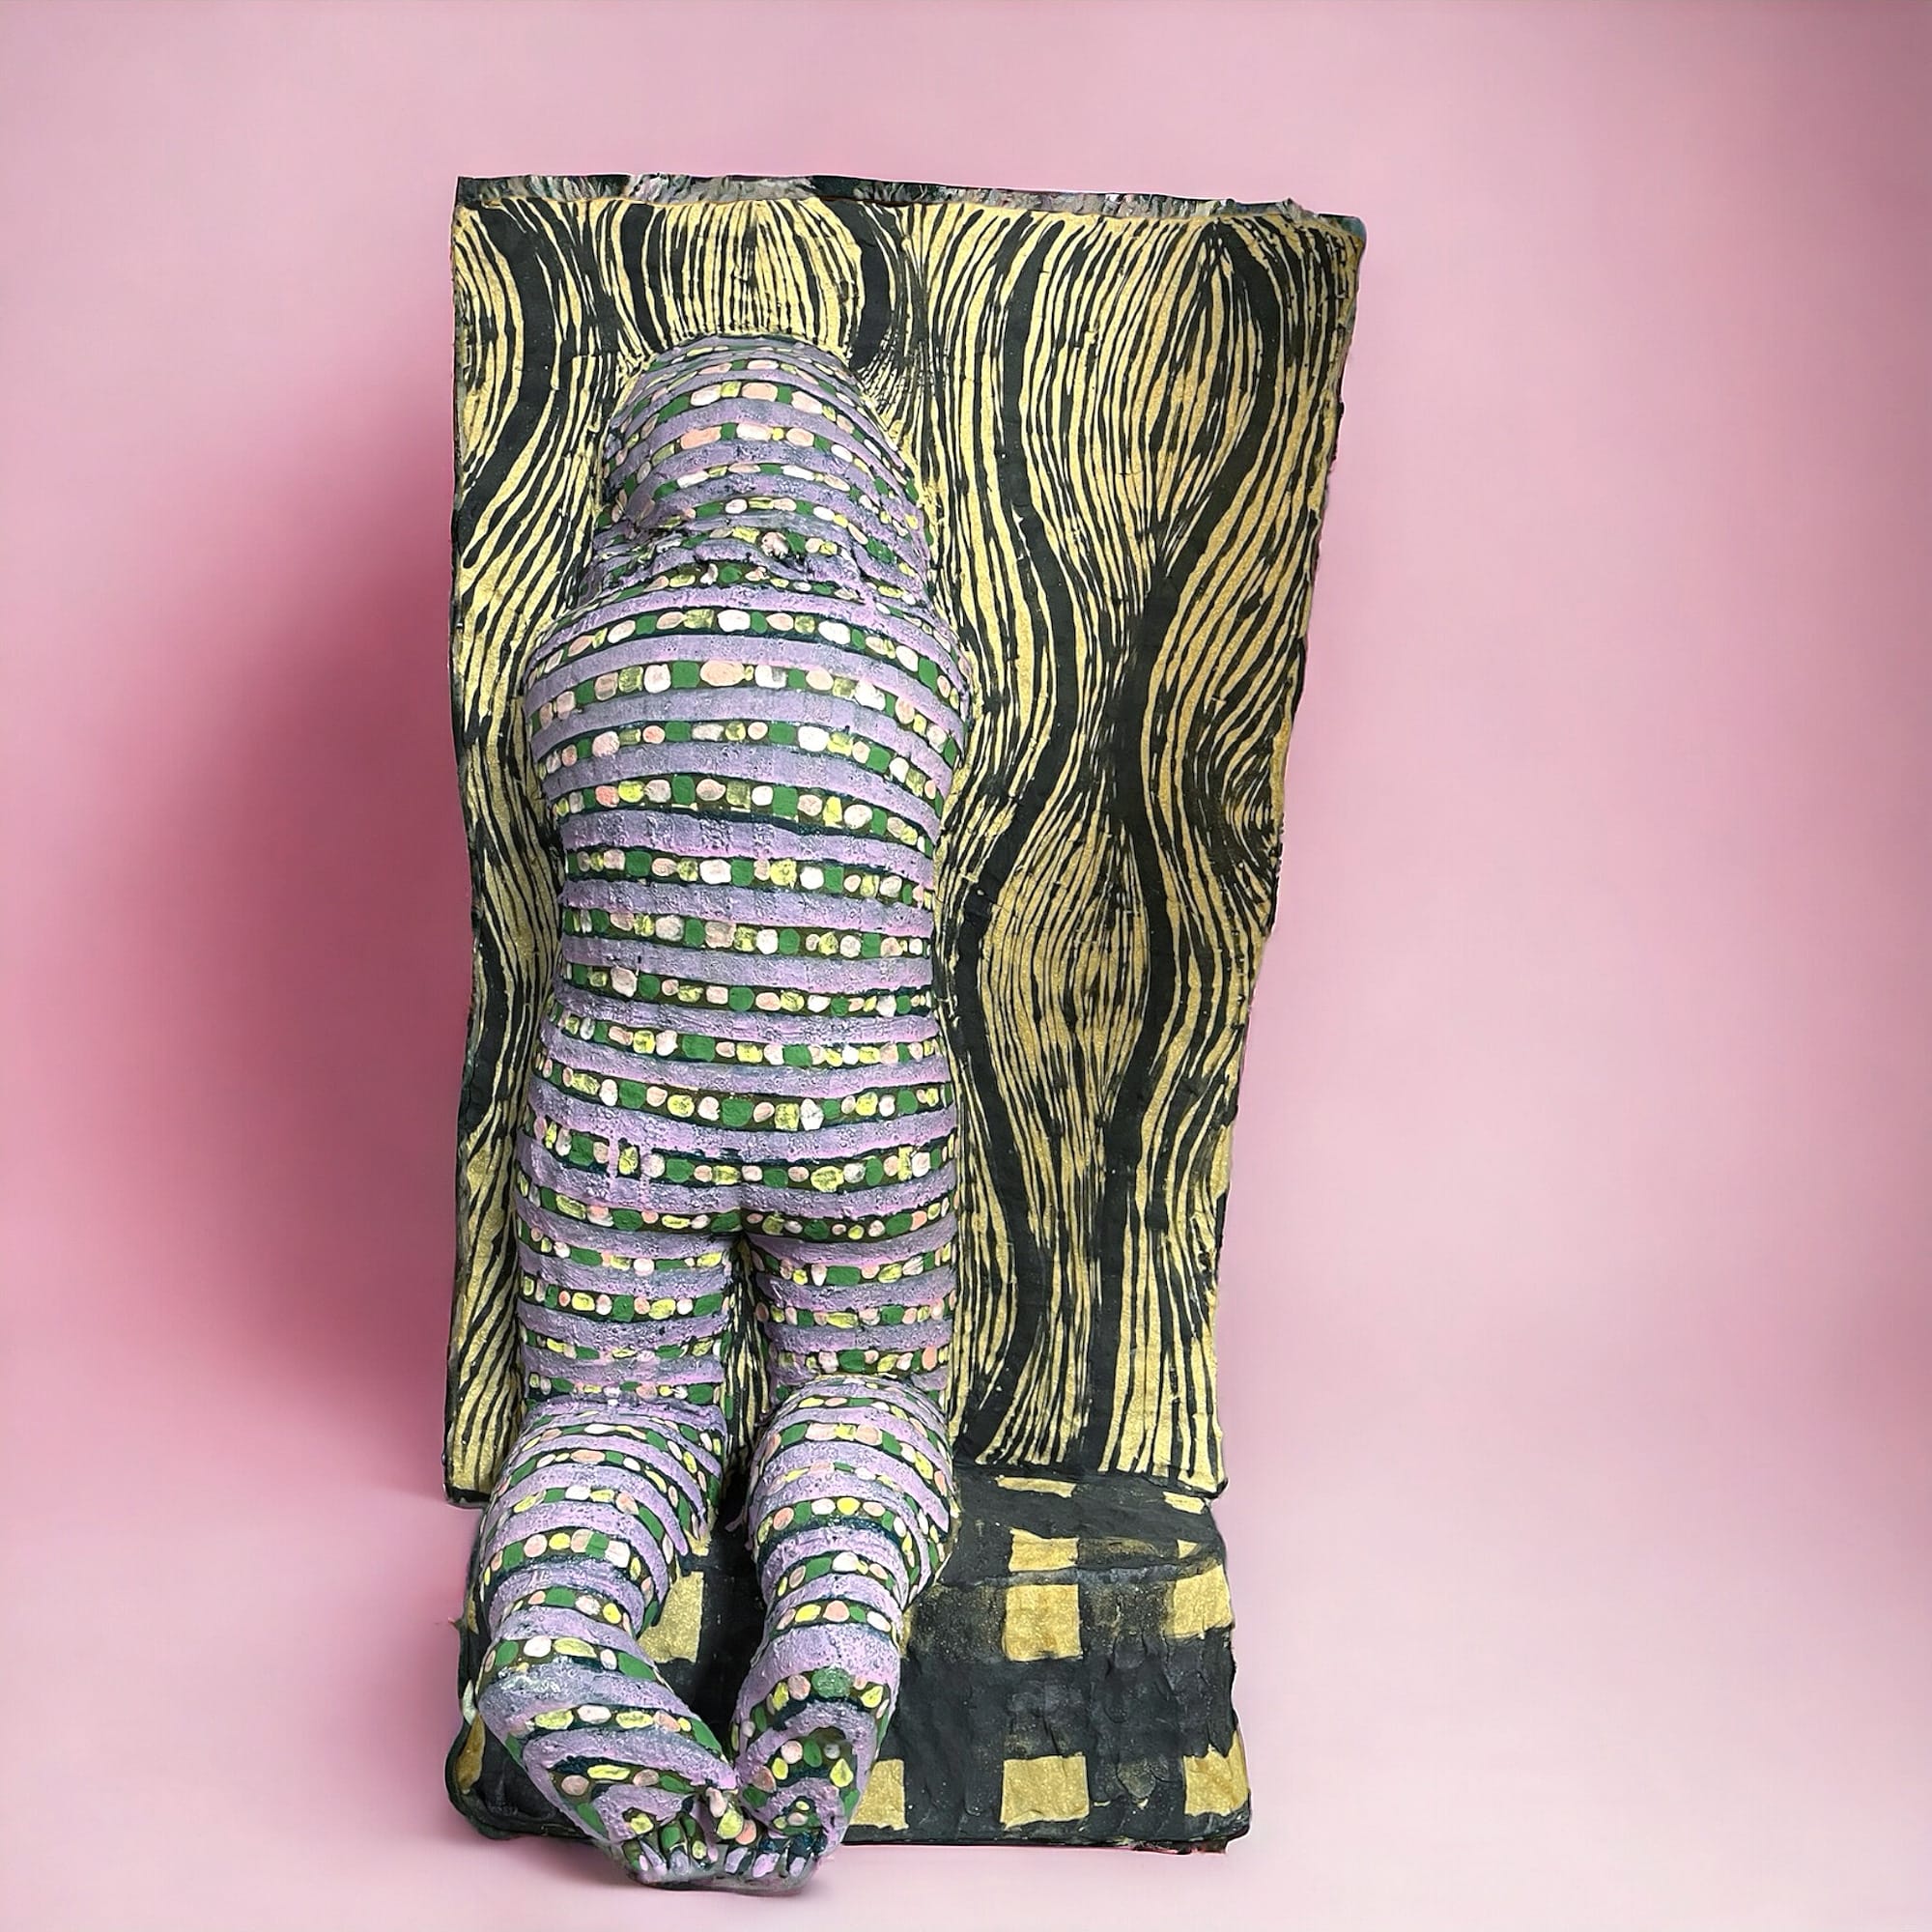 a ceramic sculpture of the back of a patterned figure kneeling. the figure disappears into a patterned background